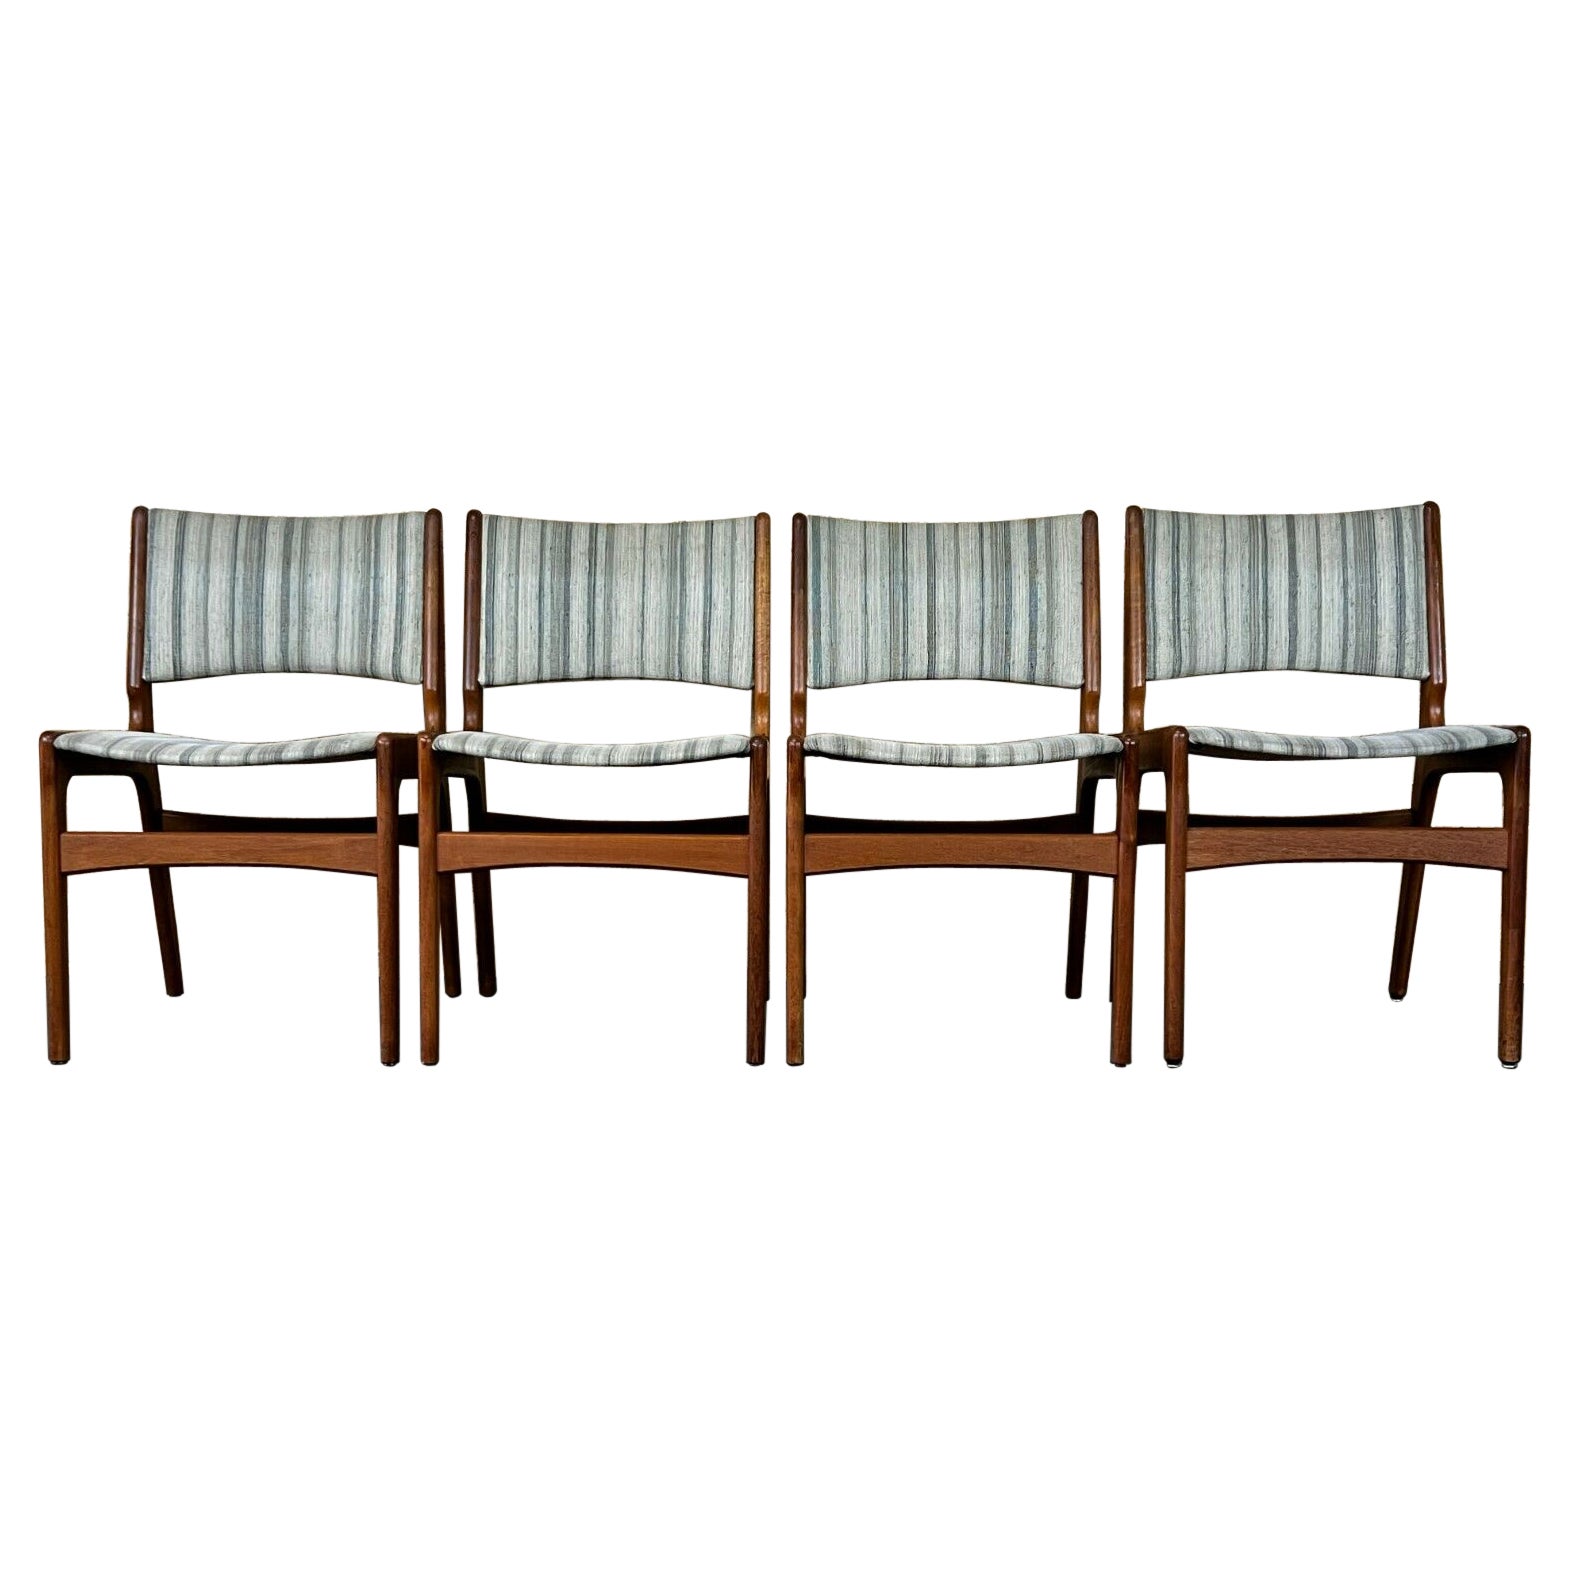 4x 60s 70s teak chairs Chair Dining Chair Henning Kjaernulf Danish 60s For Sale